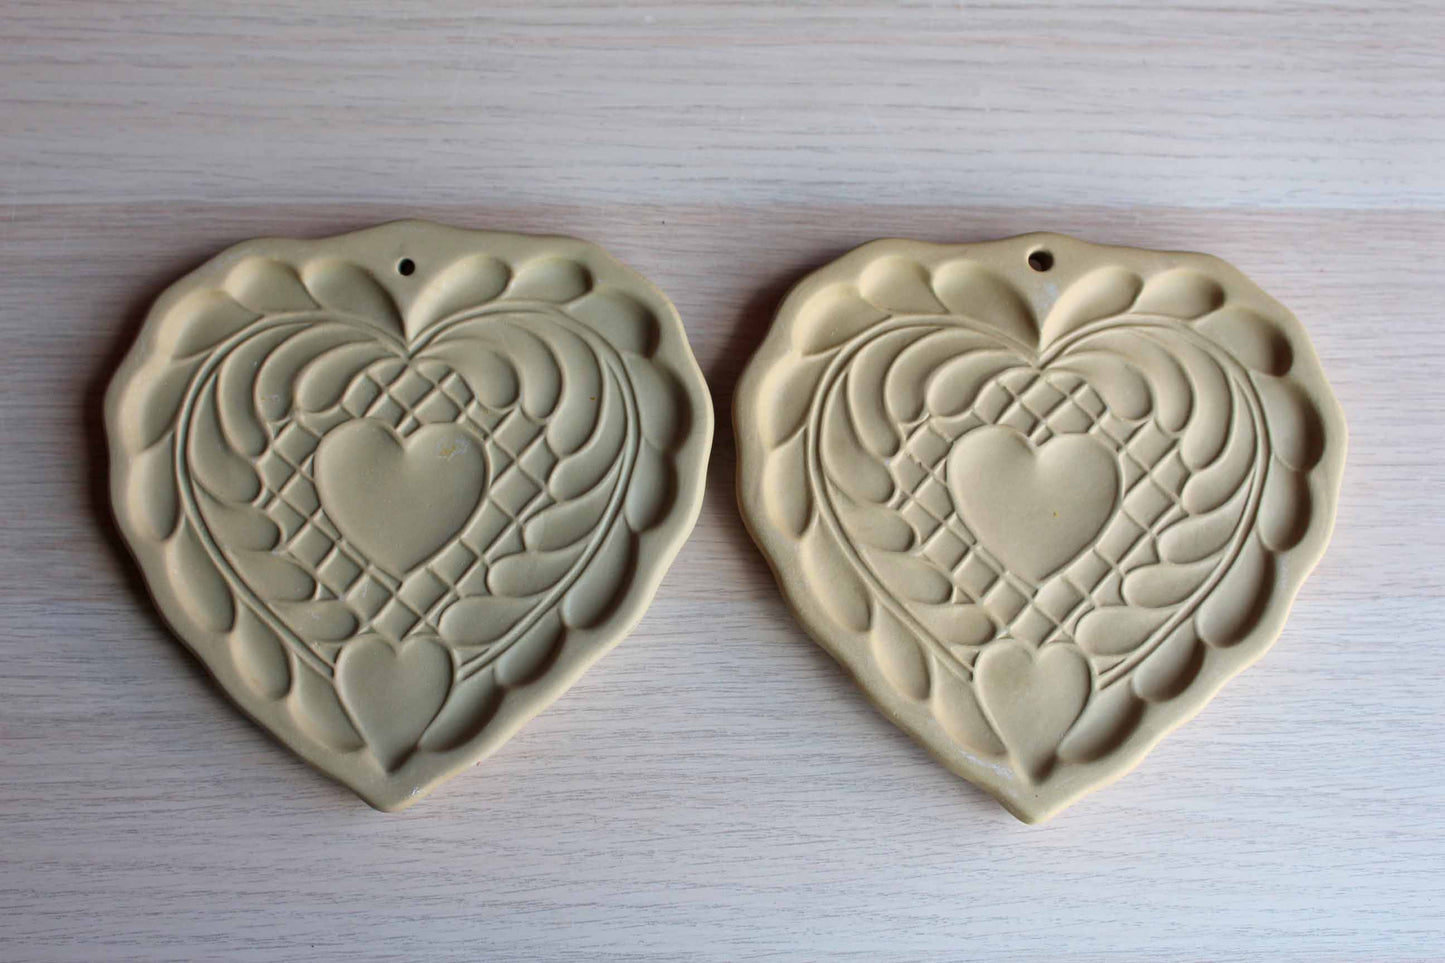 Brown Bag Cookie Art (New Hampshire, USA) 1988 Stoneware Heart Molds, A Pair